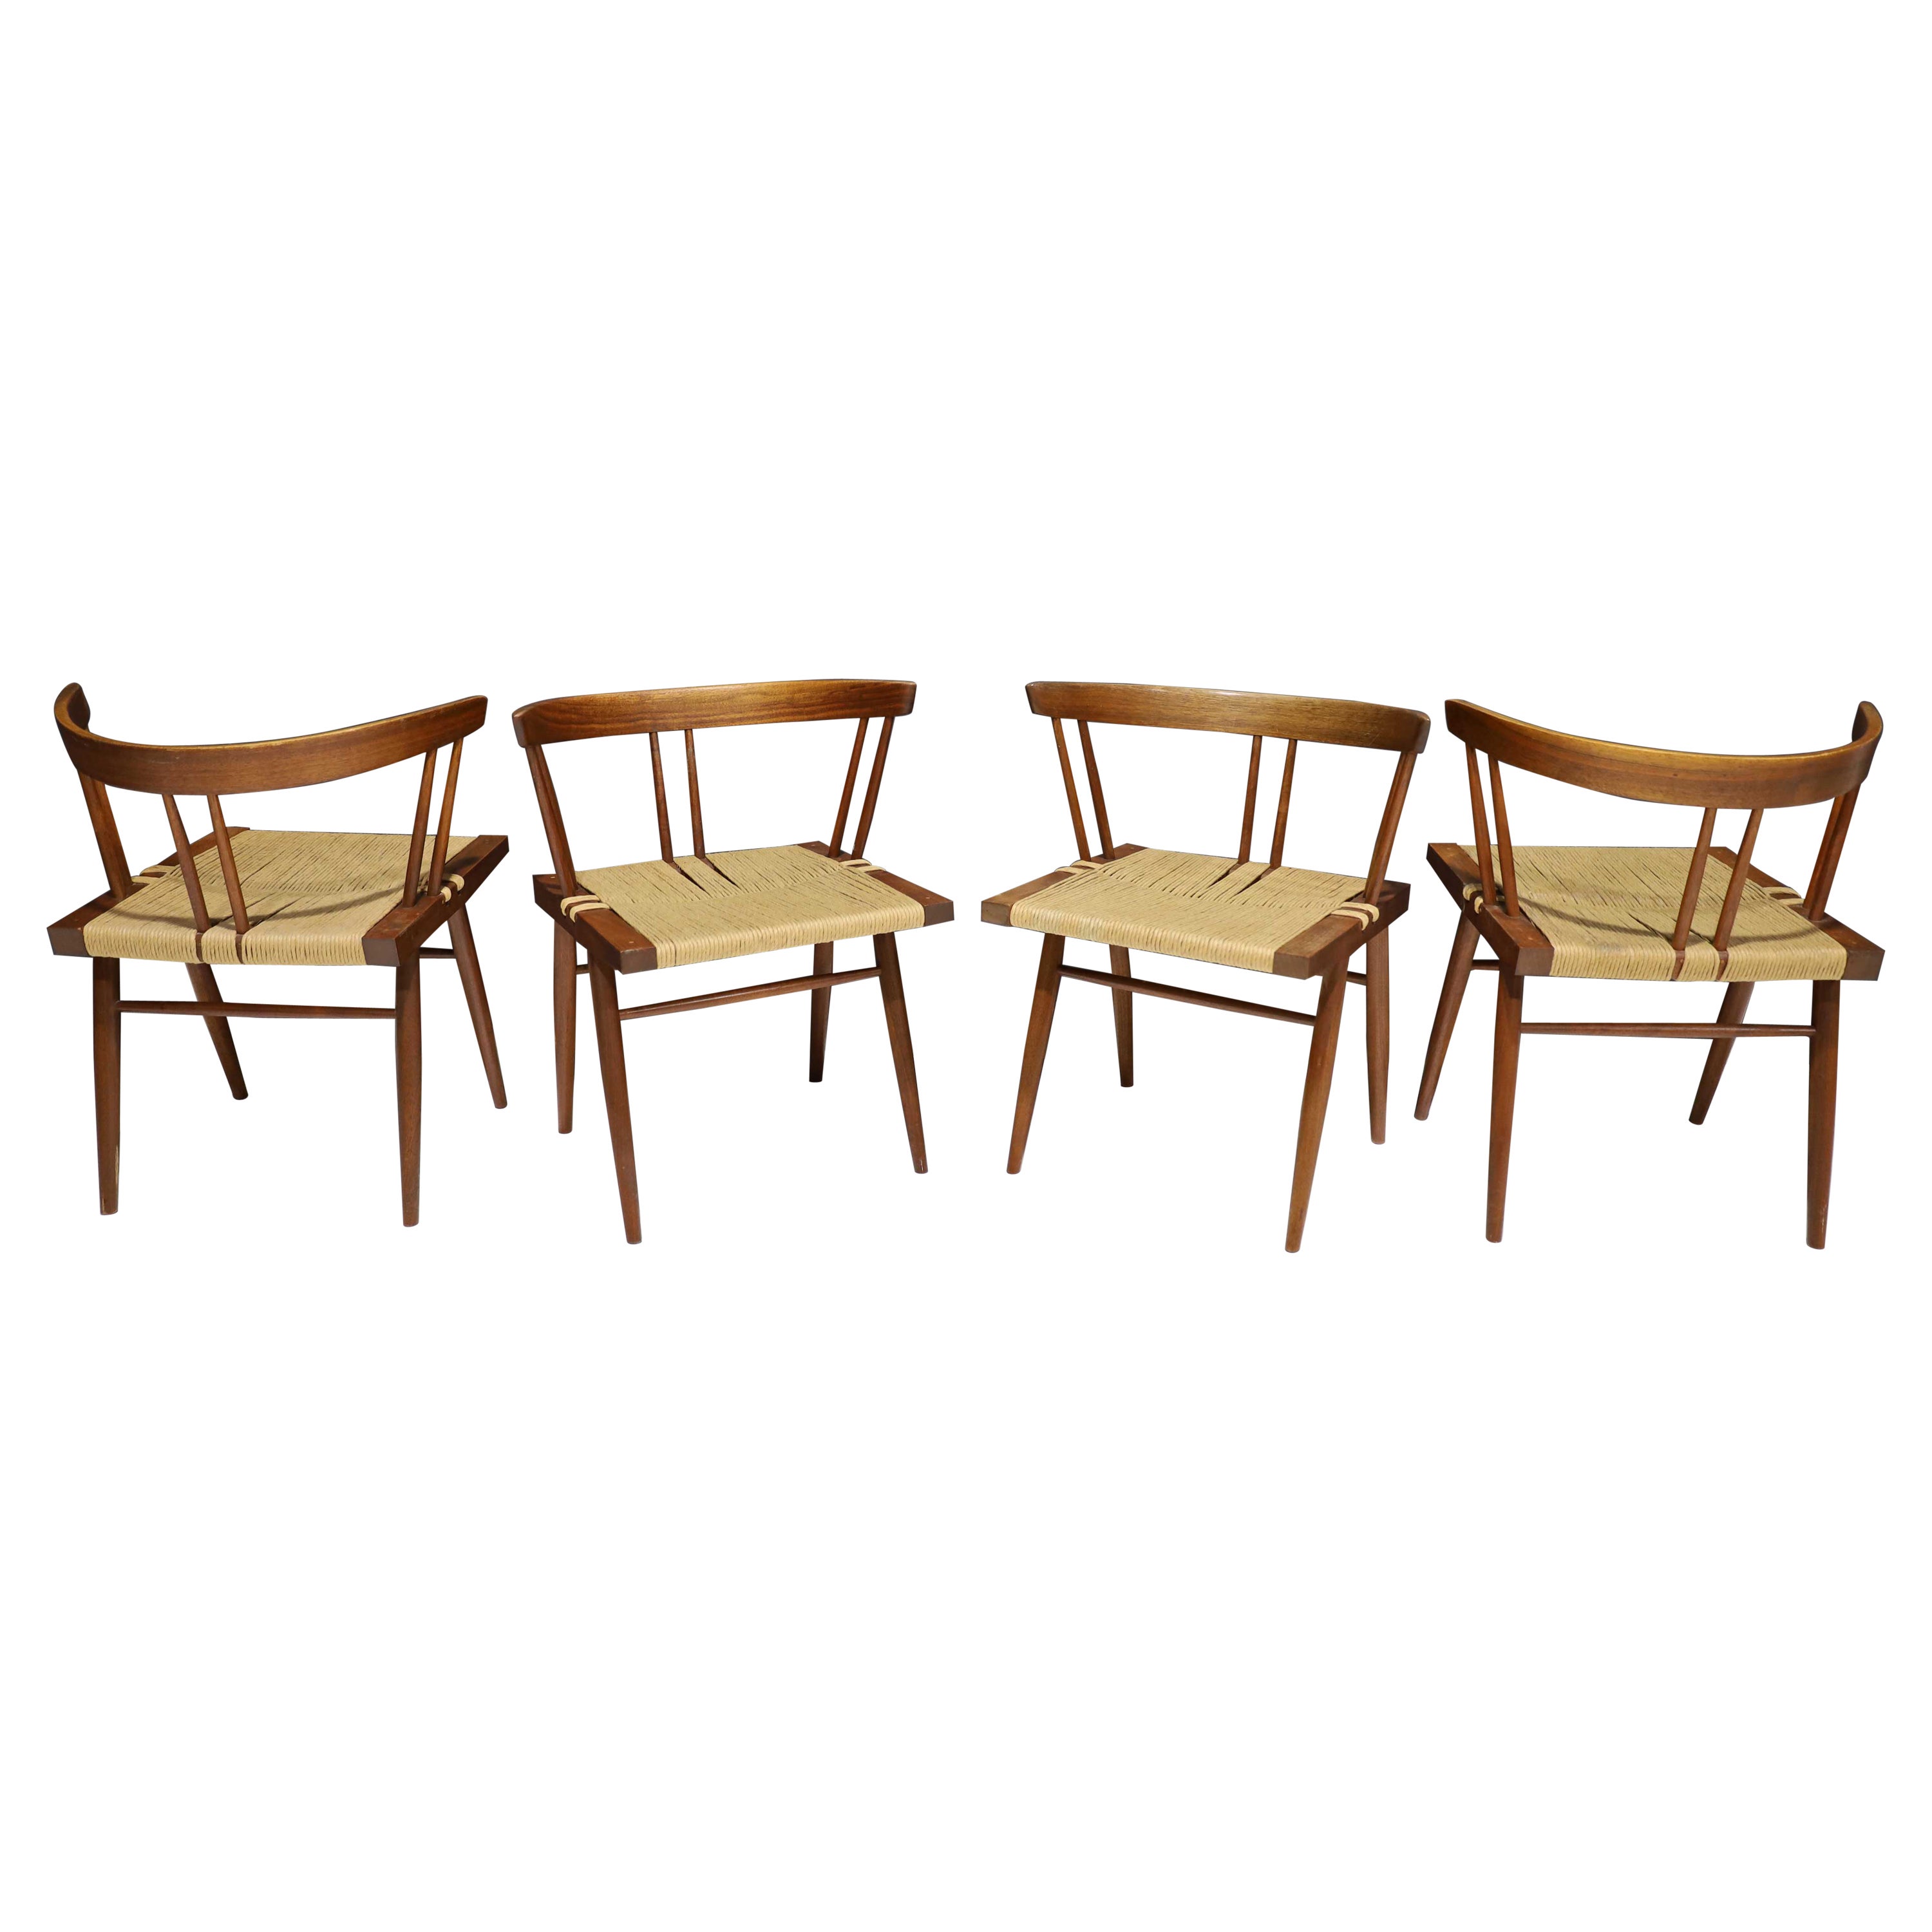 Set of Four Walnut Grass Seat Dining Chairs by George Nakashima, US, 1961